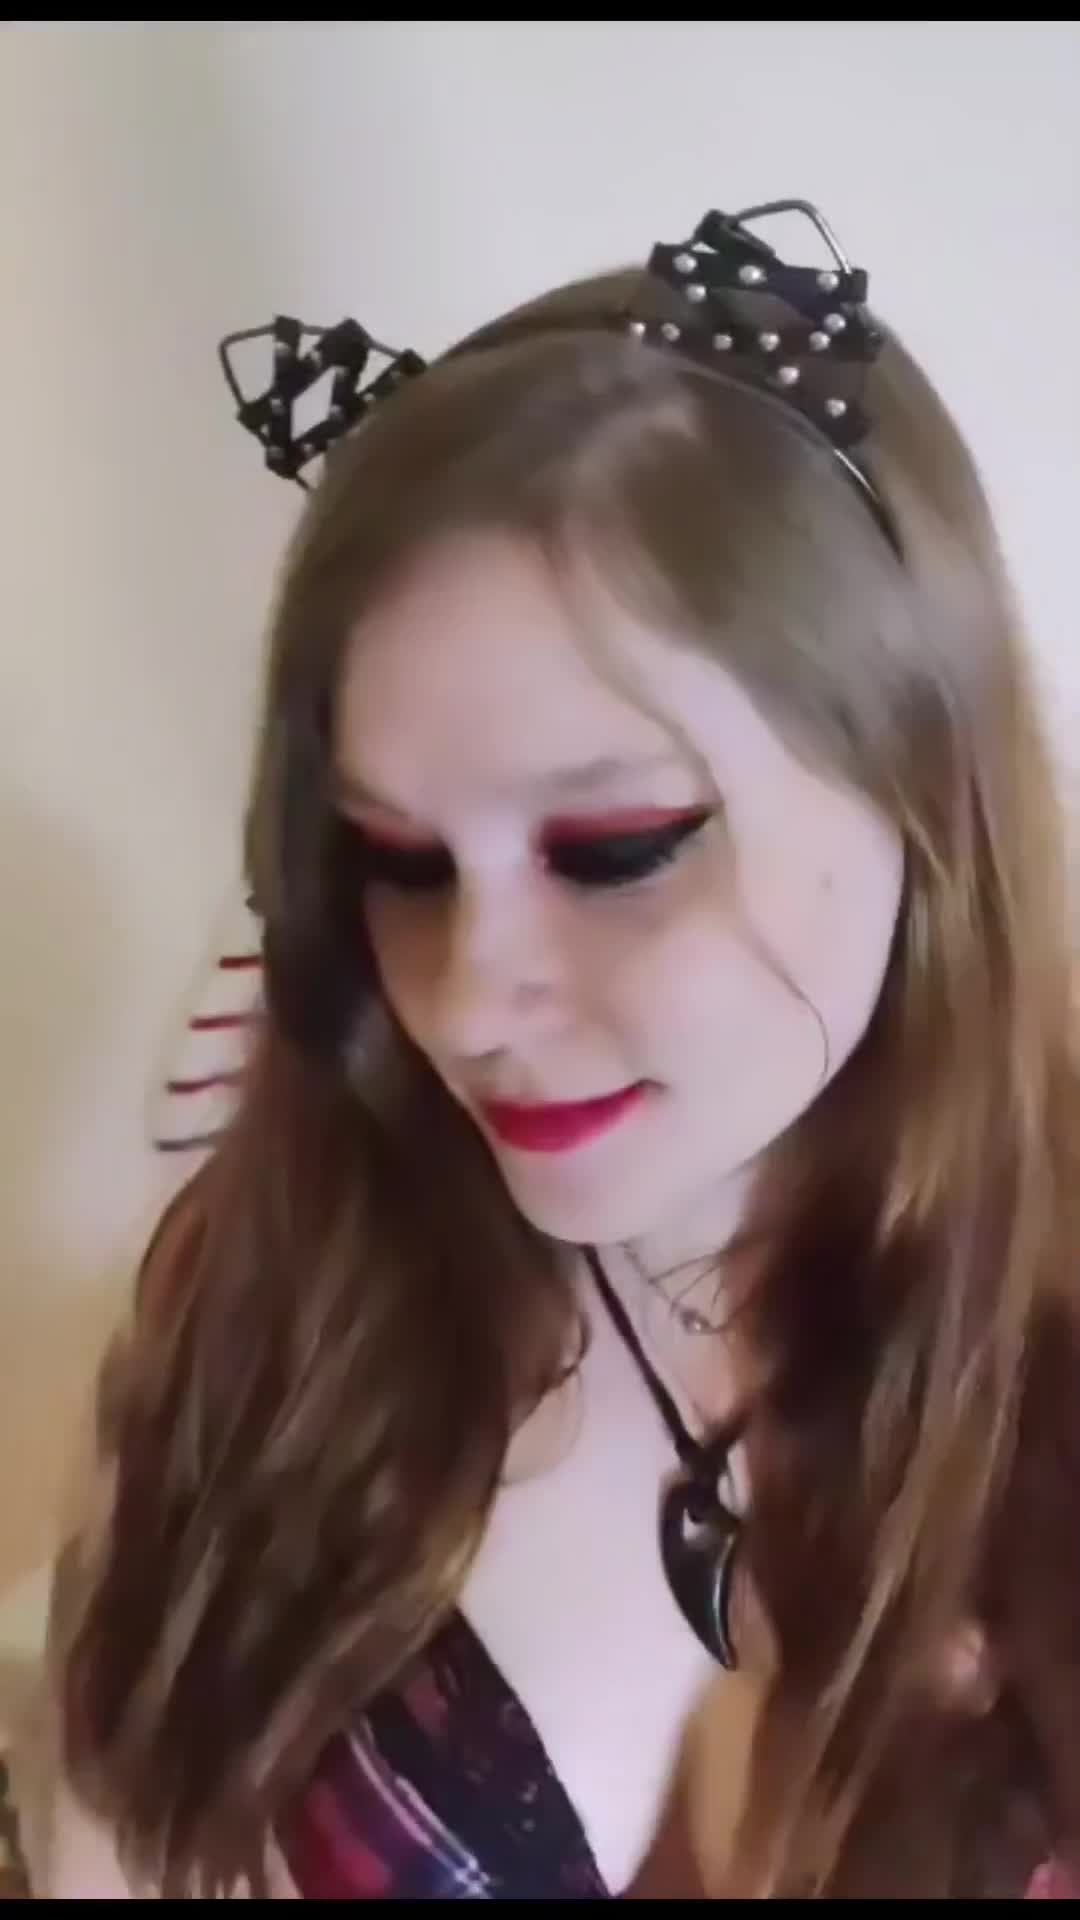 Video by Kittengirlnextdoor with the username @Kittengirlnextdoor, who is a star user,  June 20, 2023 at 10:46 AM. The post is about the topic kittengirlnextdoor and the text says 'I'm Daddy's good girl 😇🥵🙏
Onlyfans.com/kittengirlnextdoor
Fansly.com/kittengirlnextdoor
Kittygirlnxdoor.manyvids.com
#kittengirlnextdoor #fyp #kittengirl #petplay #kittengirlnextdoor'